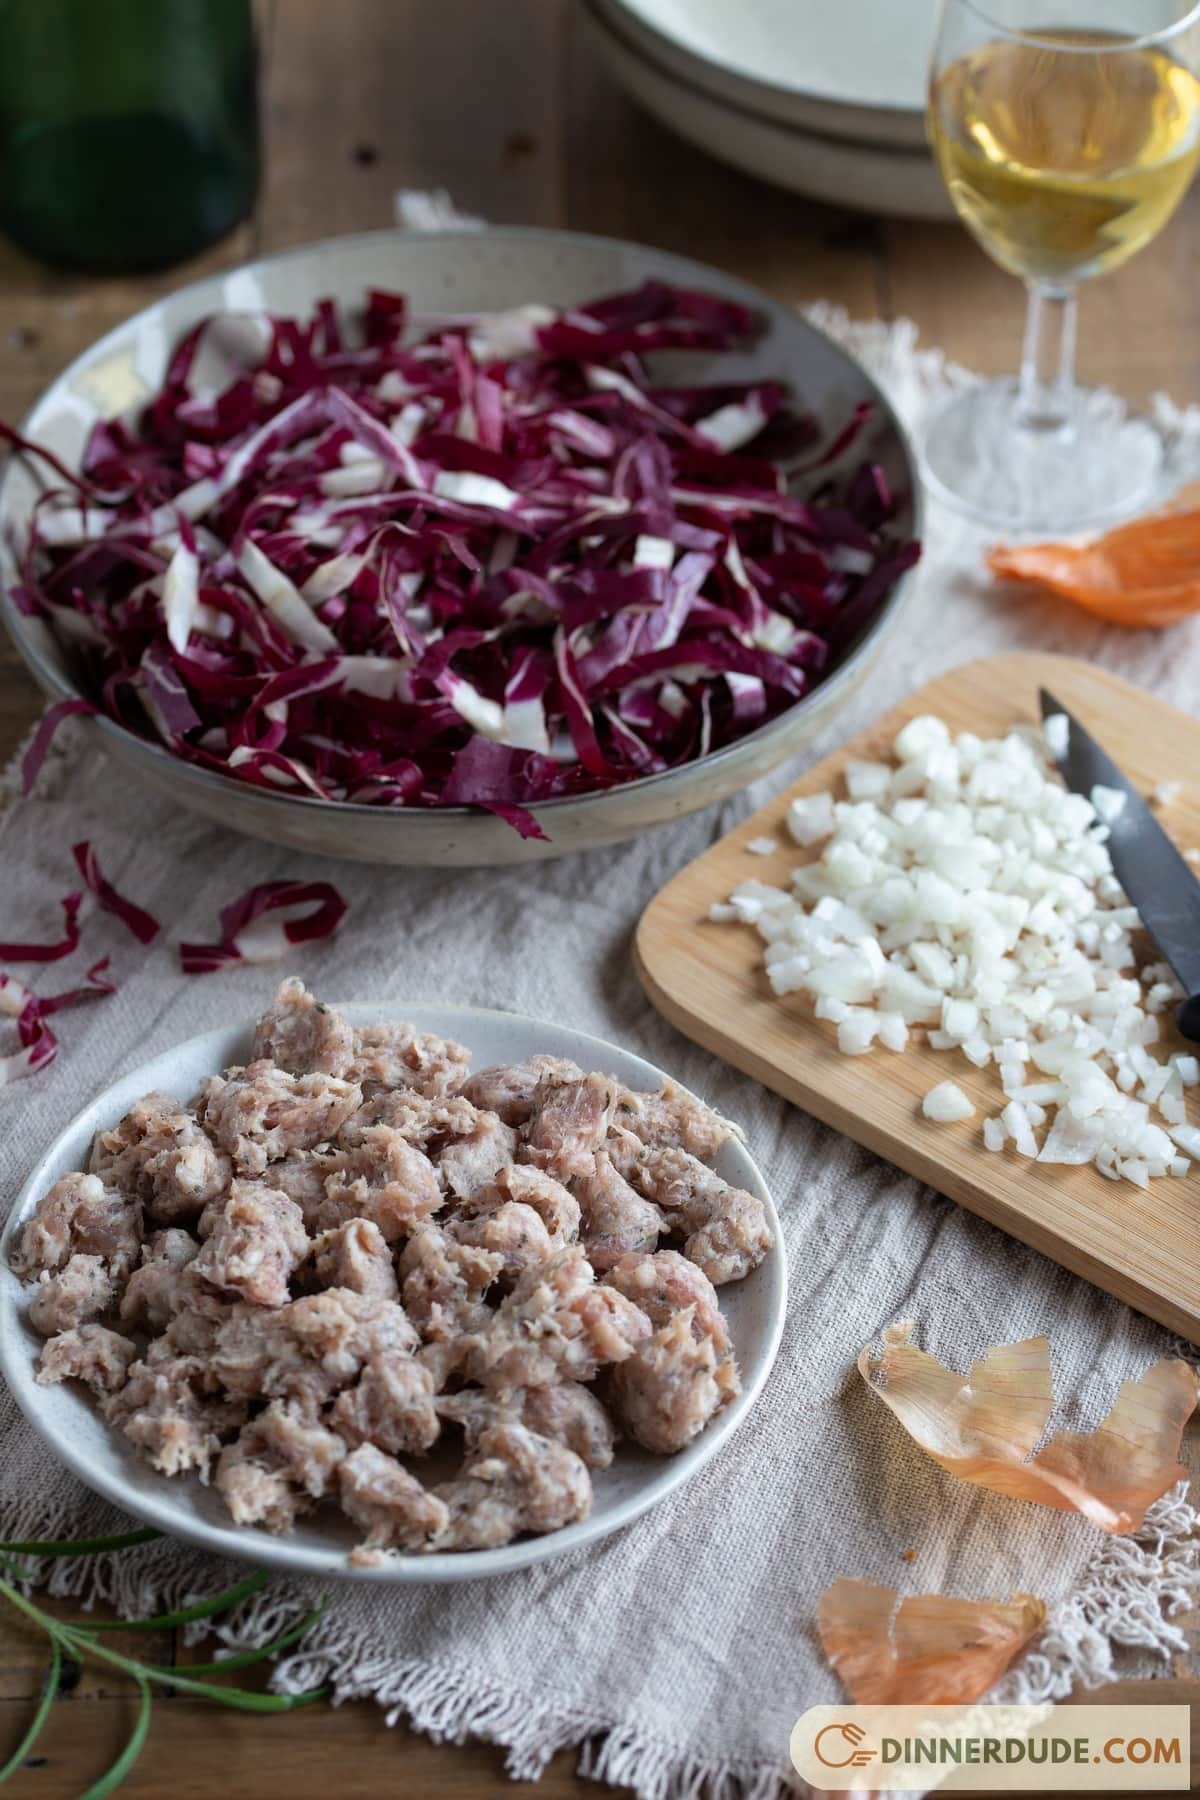 Risotto with Red Cabbage and Parmesan Cheese